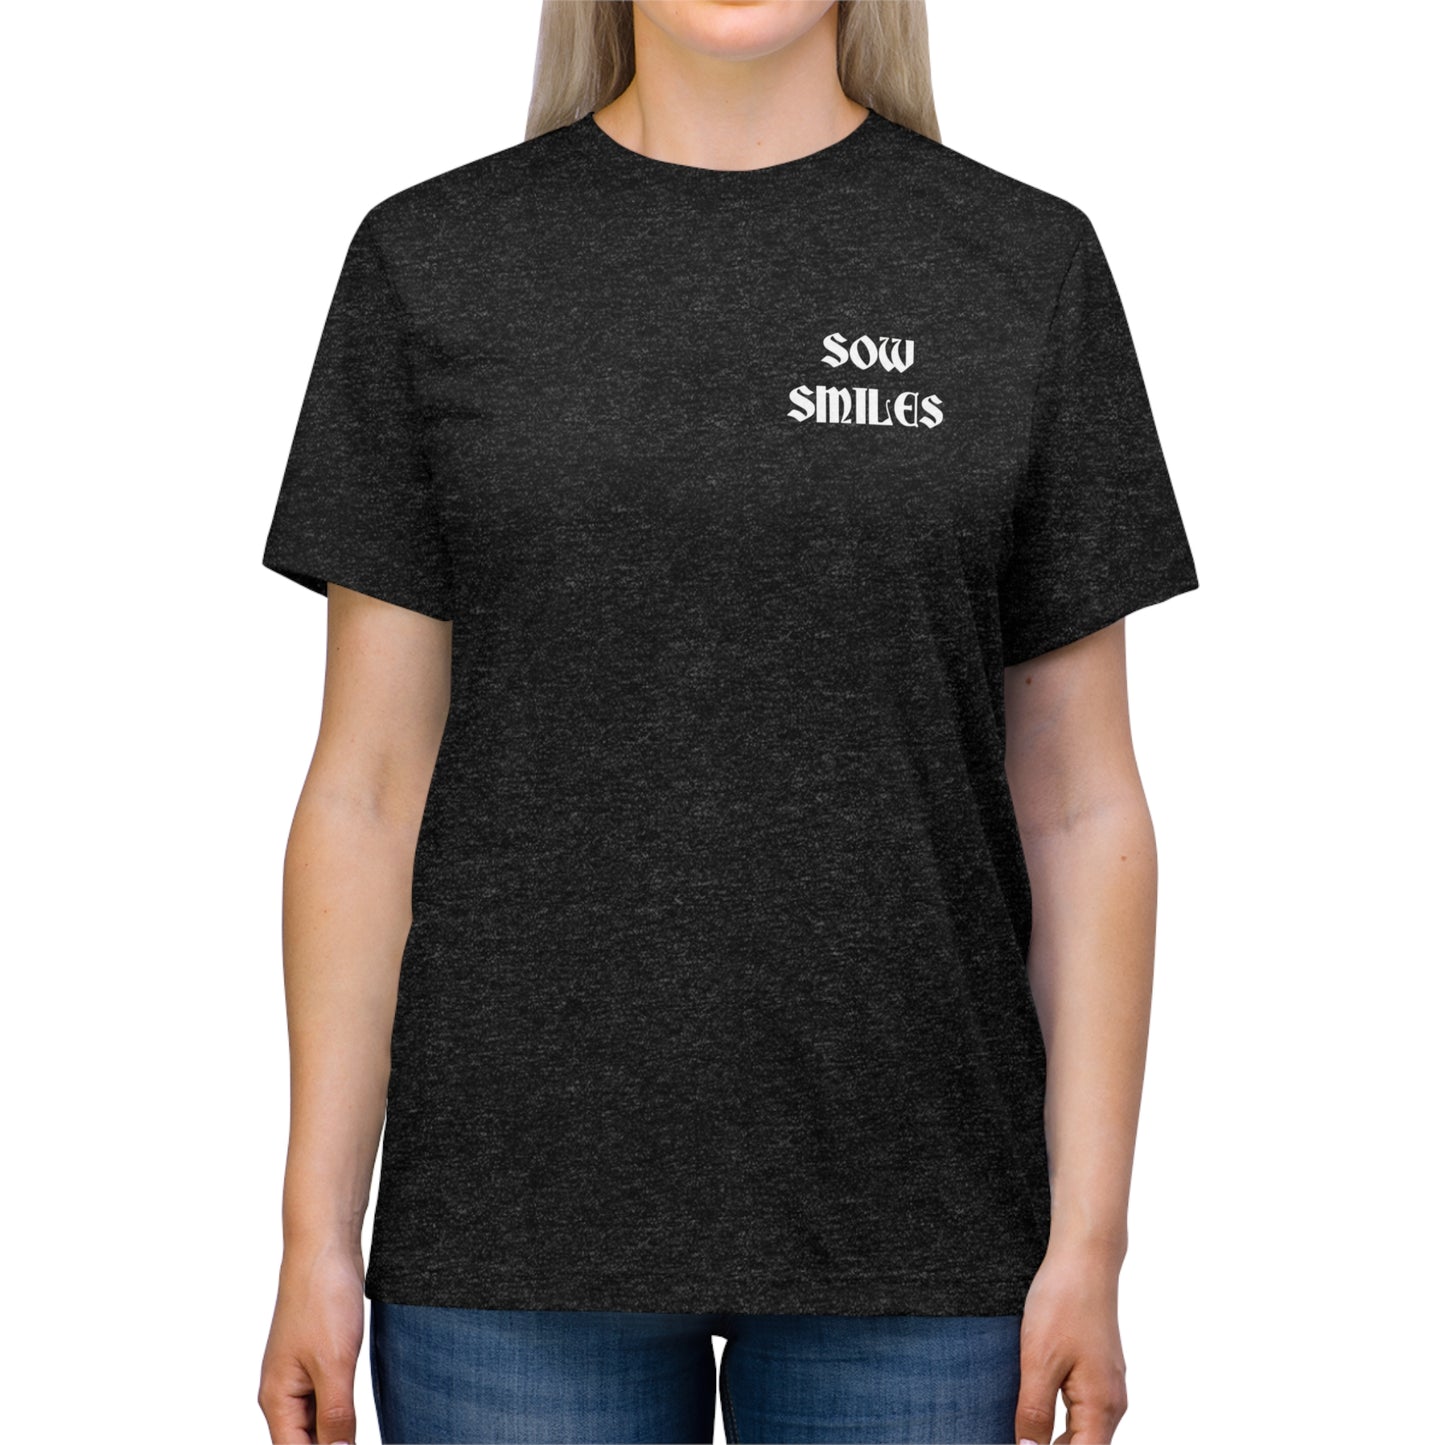 Sow Smiles! - Farmer Back - Triblend Tee